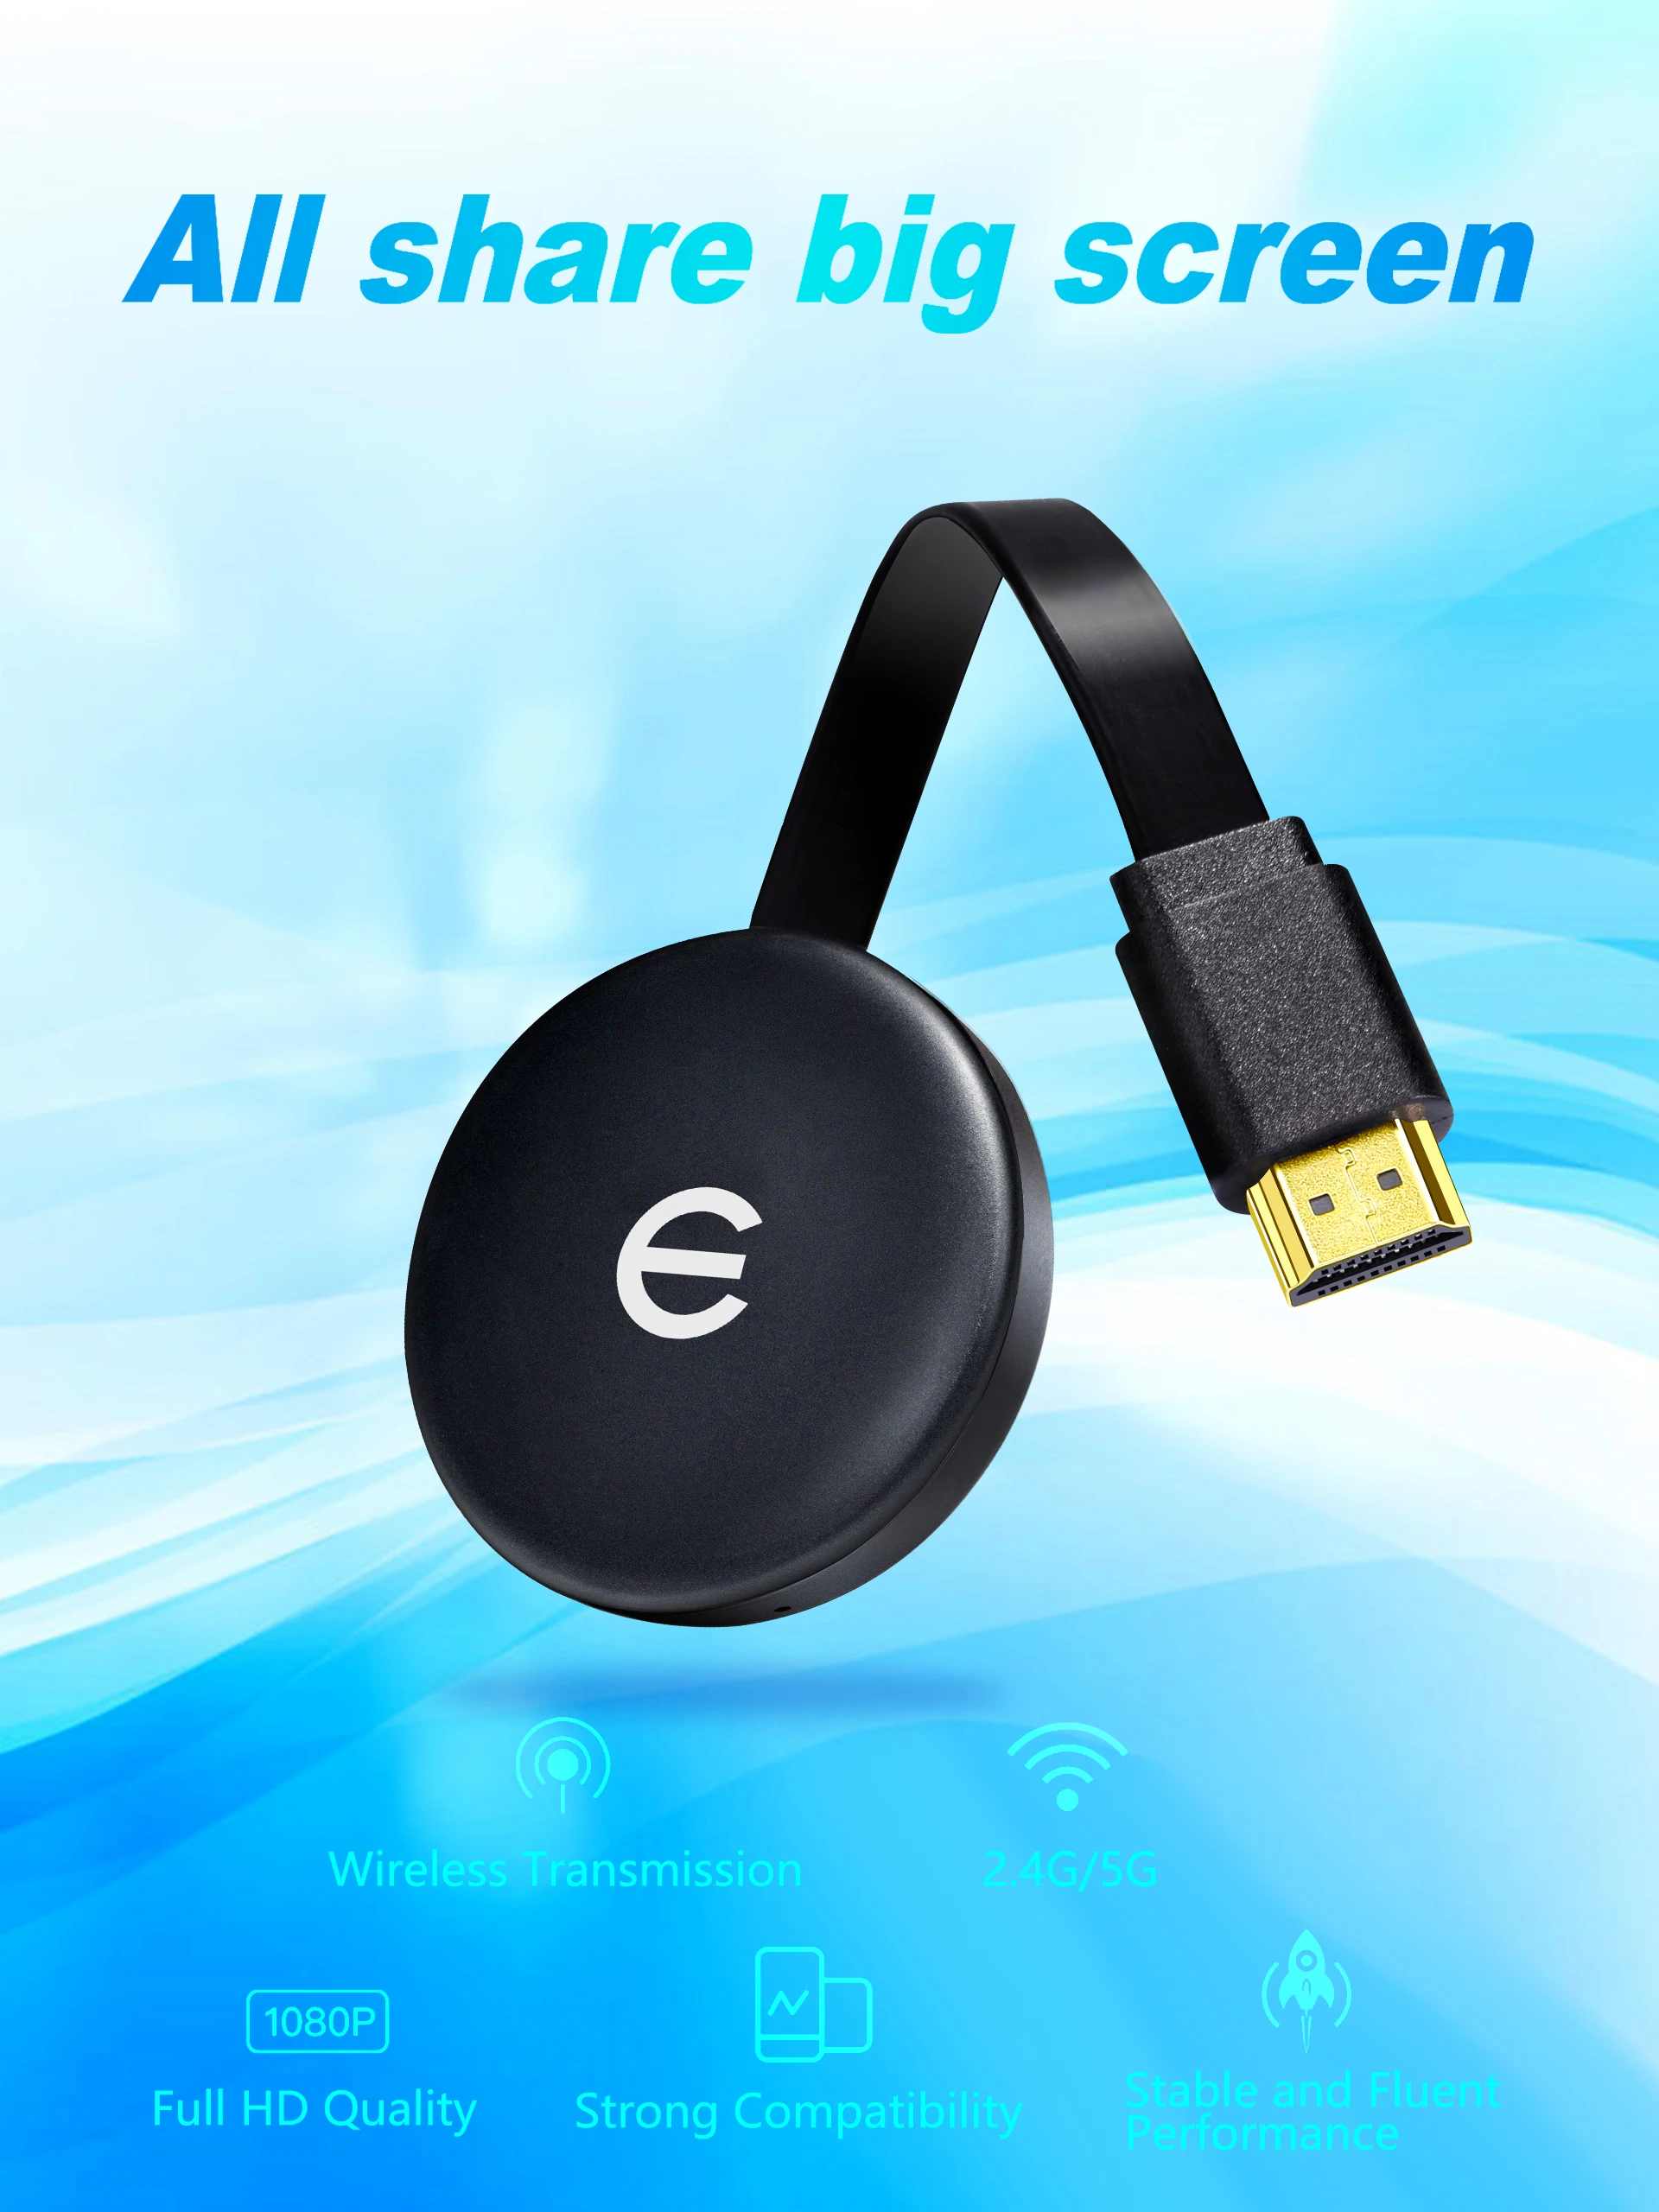 Koogold C13 WiFi Display Dongle for Mirroring and Airplay with Dual Core Miracast TV Dongle like Anycast Dongle